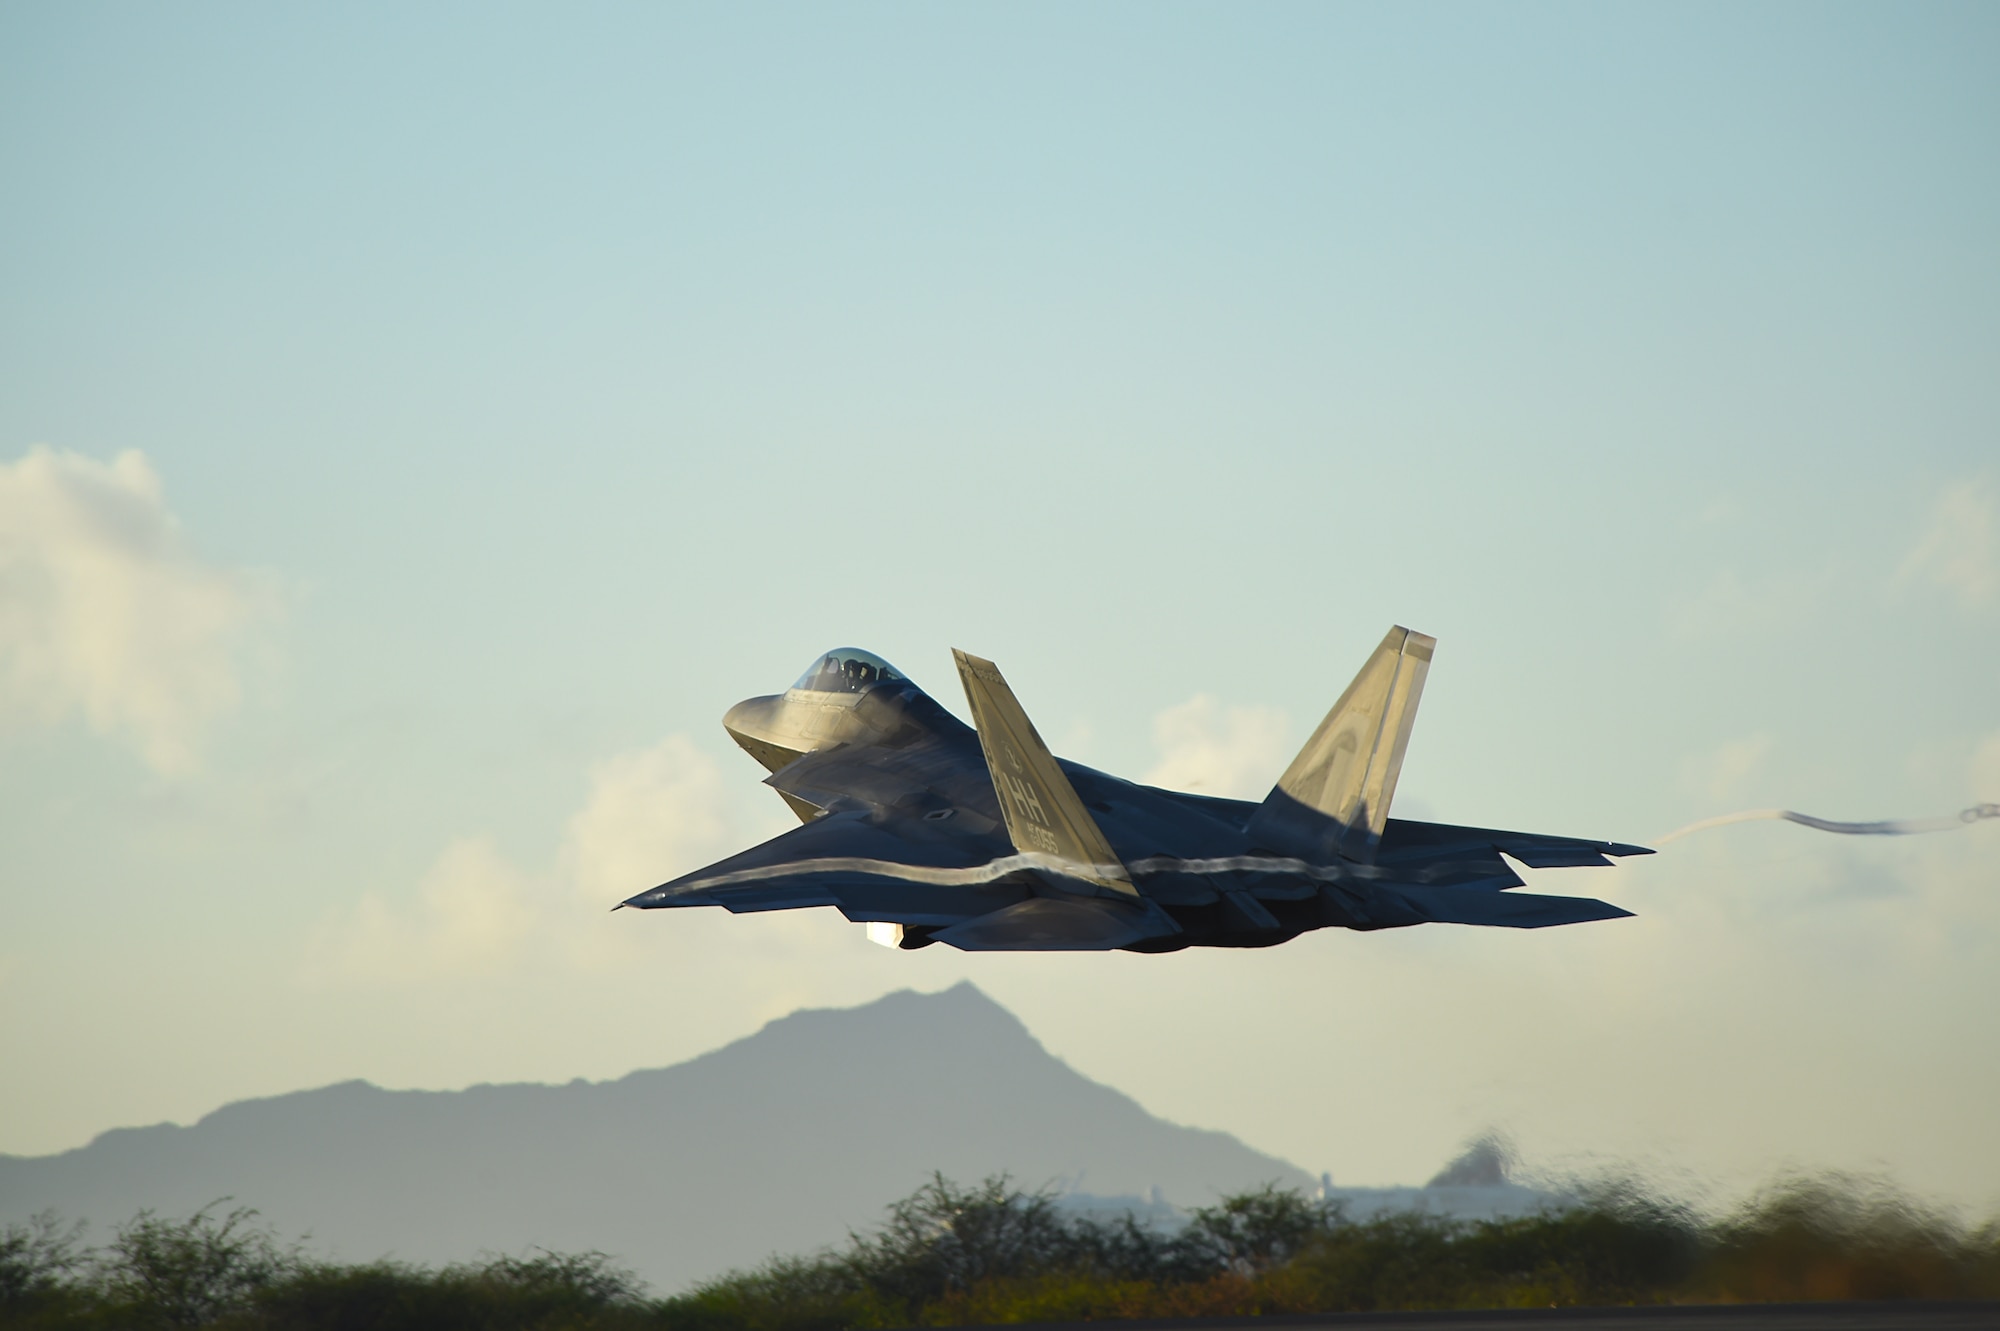 A F-22 Raptor, from the 199th Fighter Squadron, increases altitude shortly after taking off from Joint Base Pearl Harbor-Hickam, Hawaii, June 6, 2015. Pilots of the F-22 from the Hawaii Air National Guard’s 199th Fighter Squadron and the 19th Fighter Squadron teamed up with maintenance Airmen from the 154th Wing and 15th Maintenance Group to launch and recover 62 Raptors in a day. The previous record was 46 sorties in one day with 14 aircraft, this recorded was broken using only 12 of the 18 aircraft in the smallest F-22 squadron in the Air Force. (U.S. Air Force photo by Tech. Sgt. Aaron Oelrich/Released)   